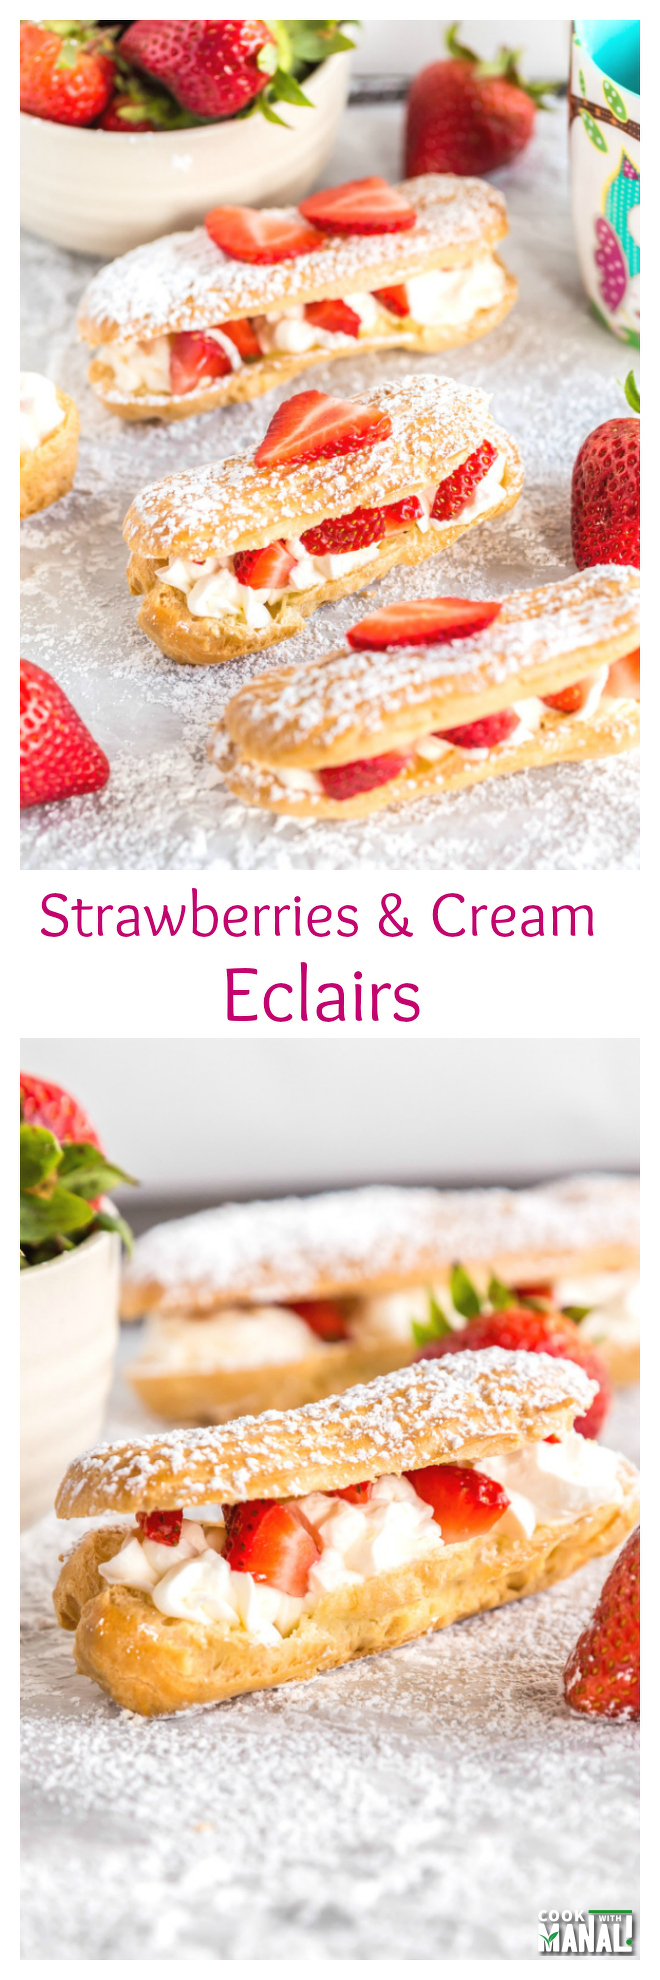 Strawberries and Cream Eclairs Long Collage